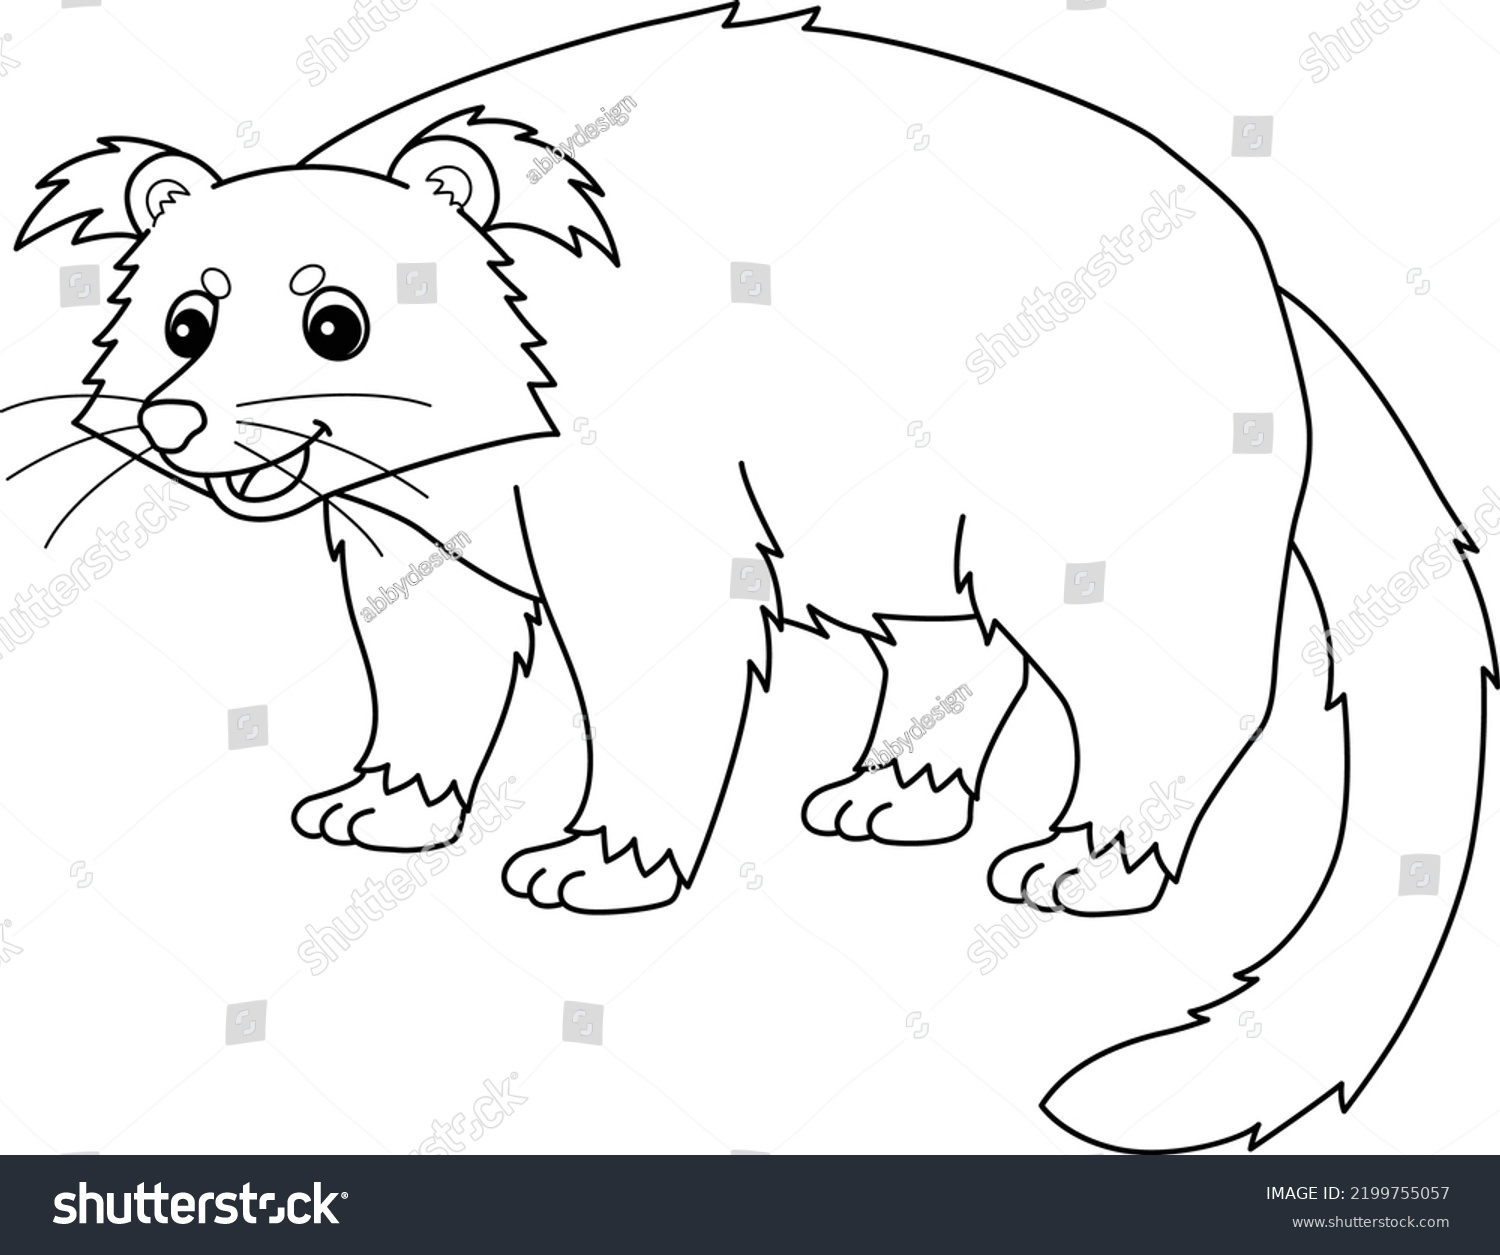 SVG of Binturong Animal Isolated Coloring Page for Kids svg